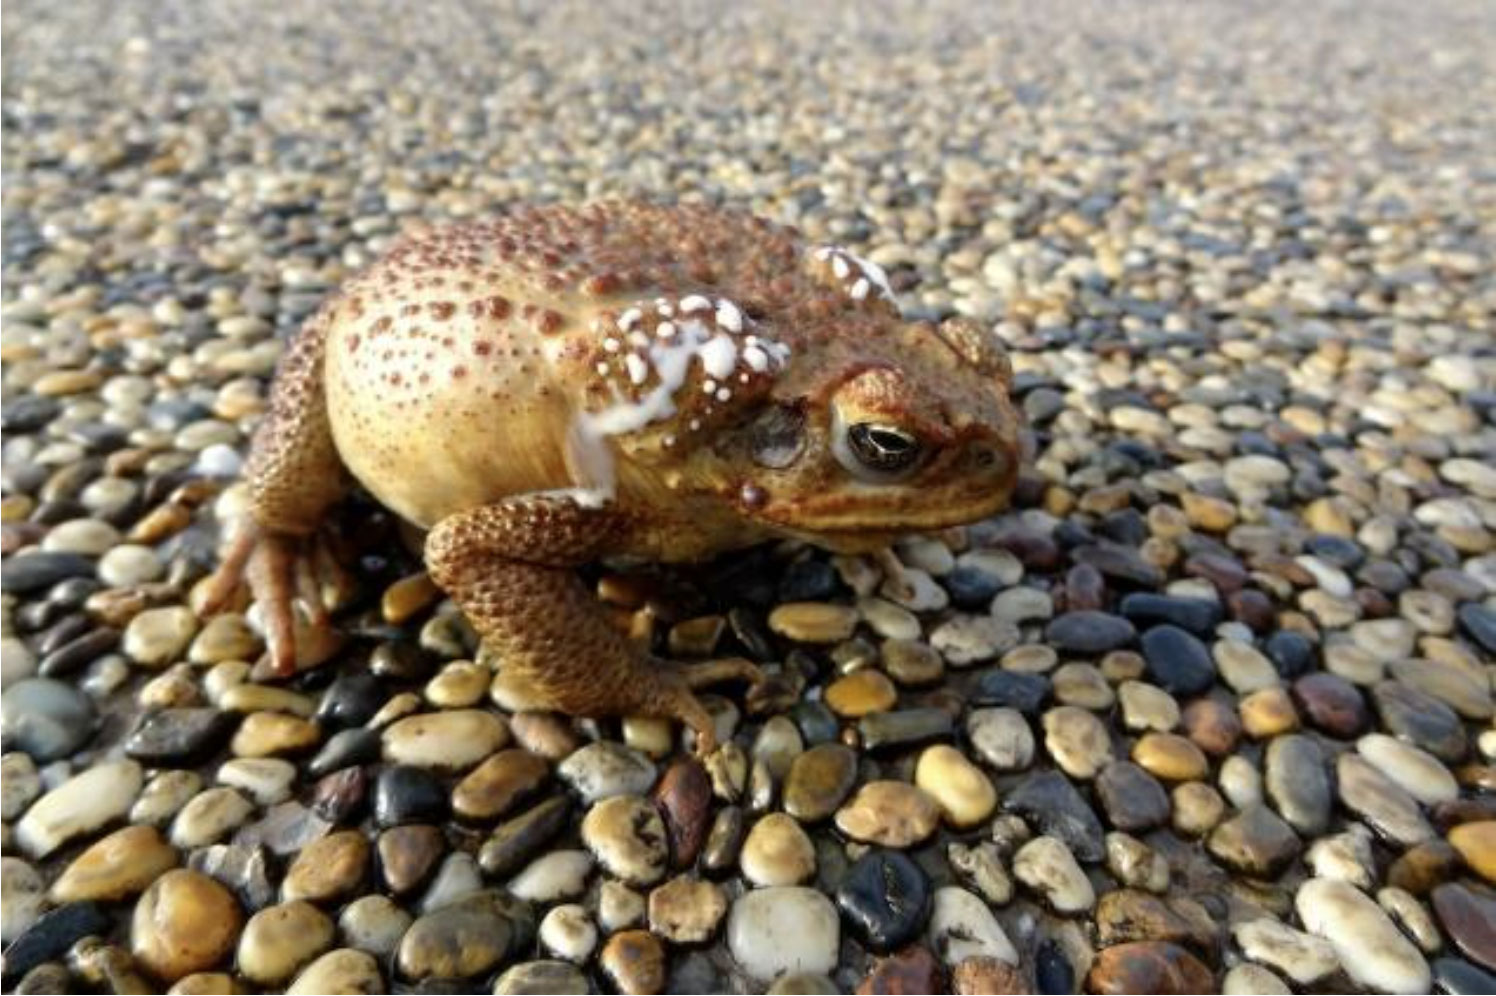 Clayfield Vet - Cane Toads and Your Pets